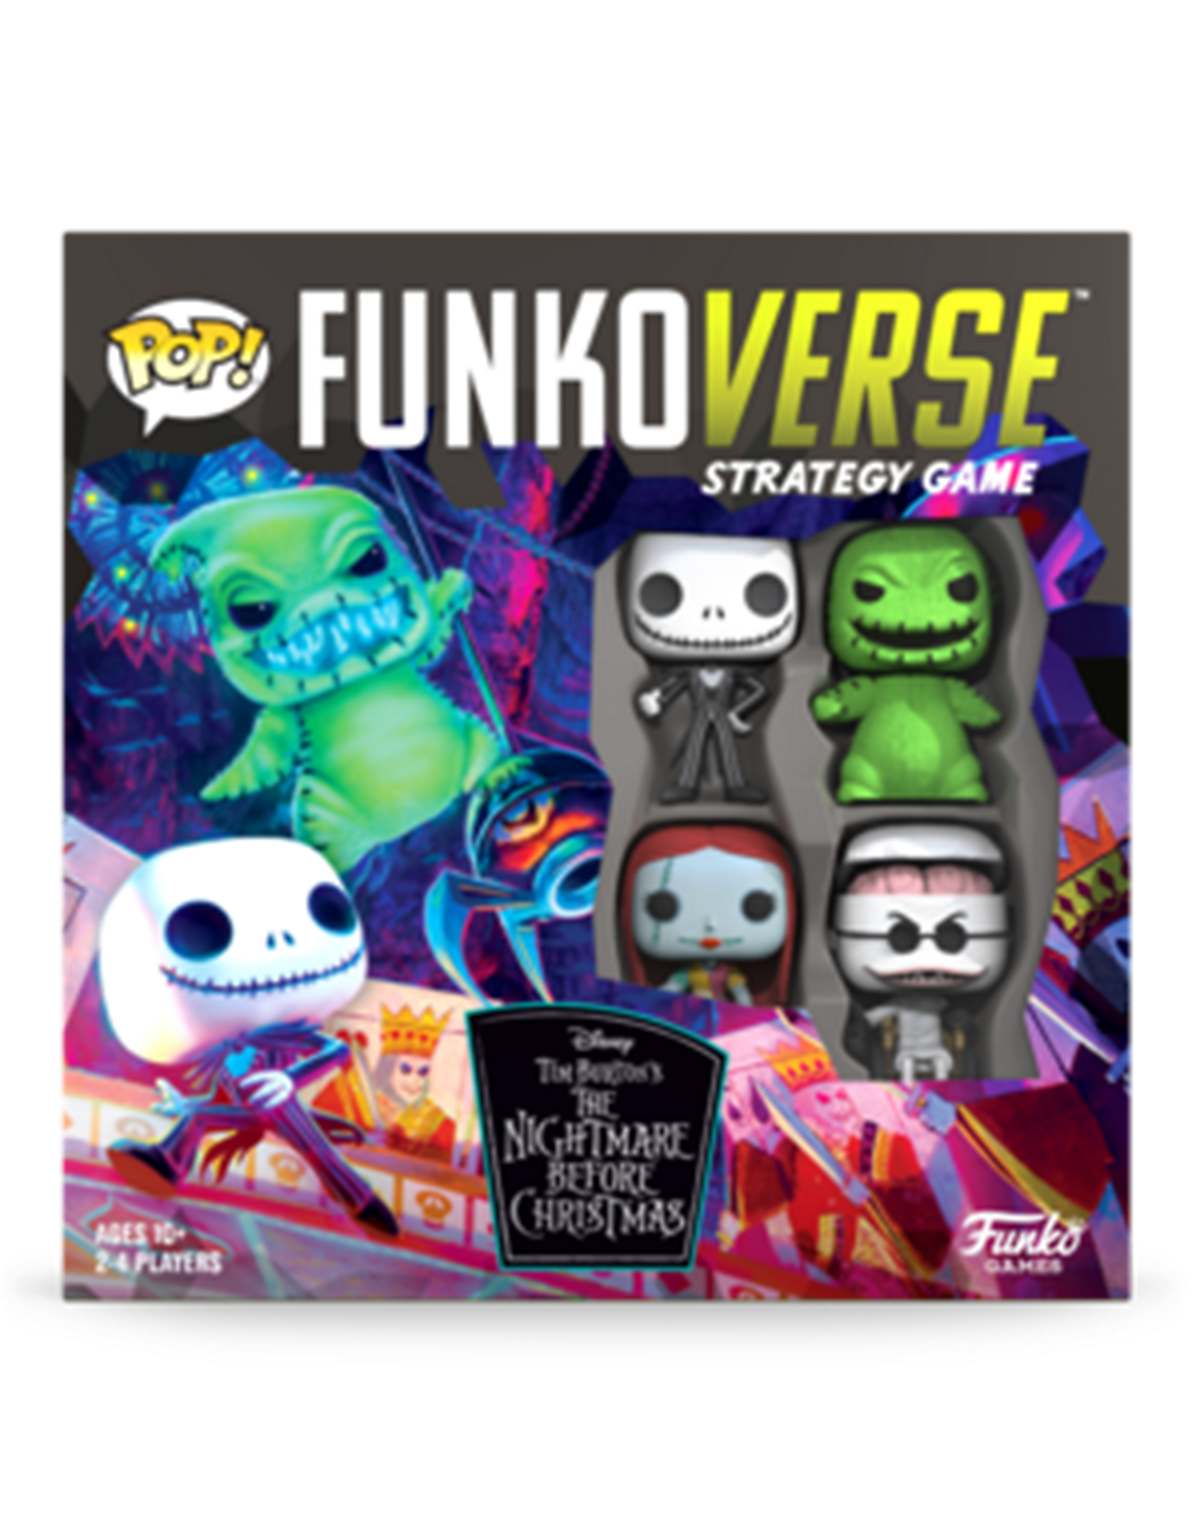 The Nightmare Before Christmas Funkoverse Strategy Game